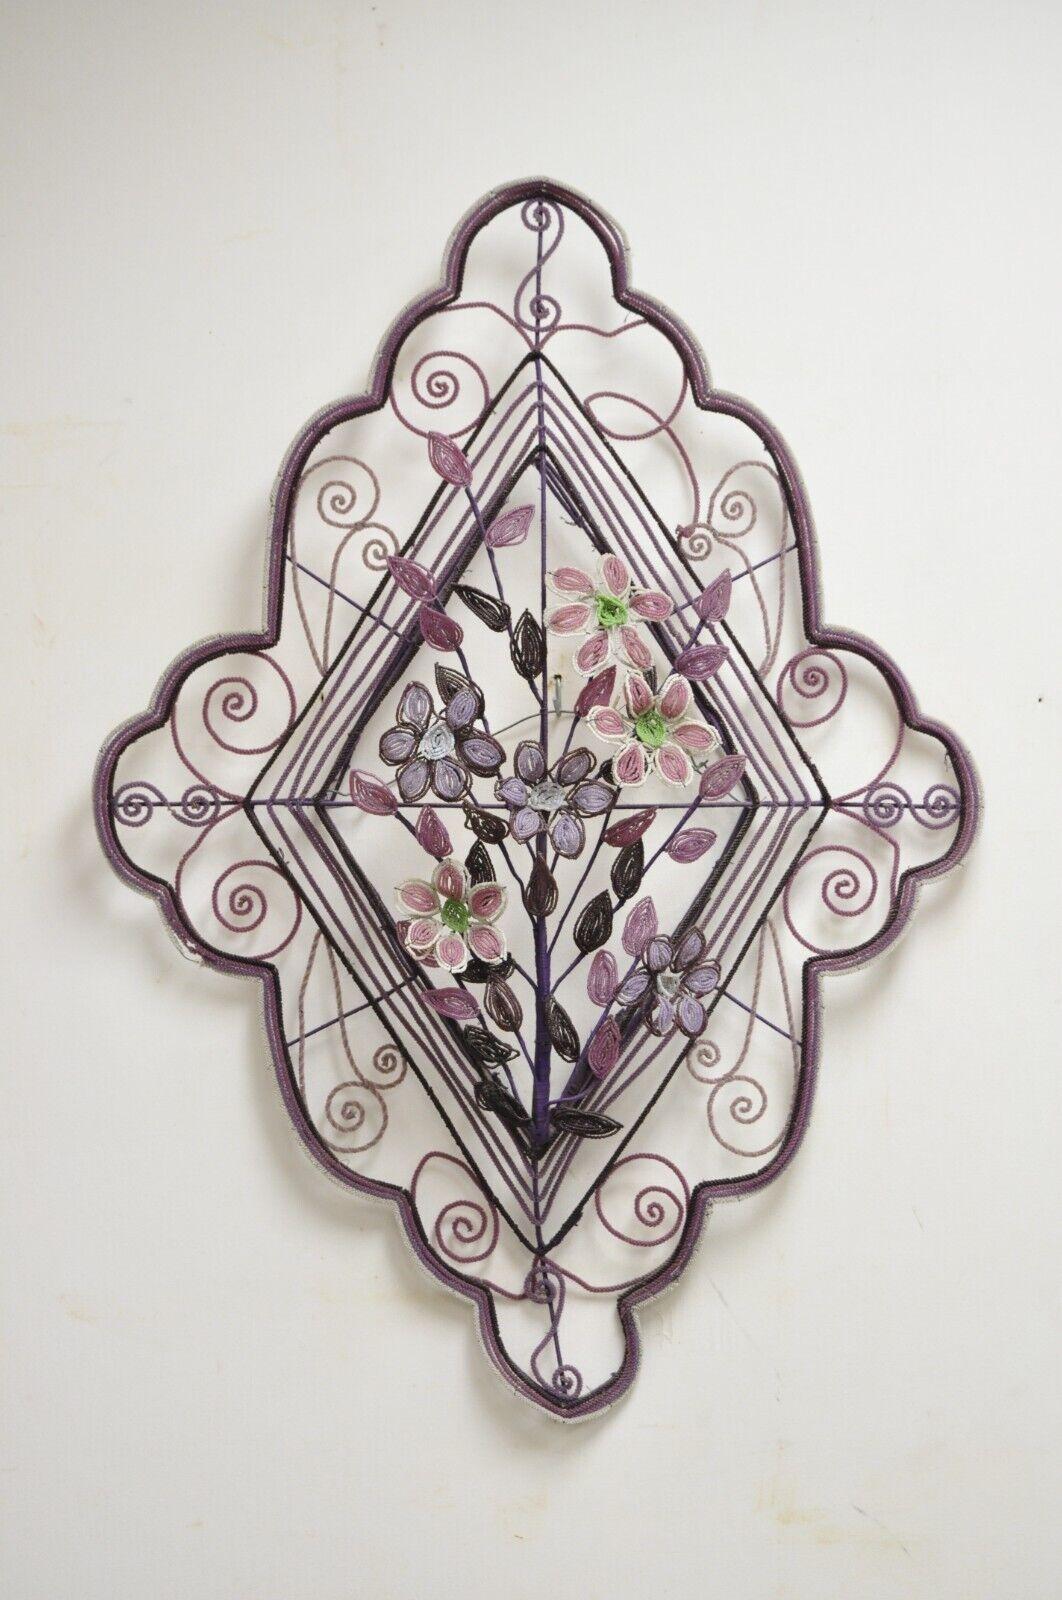 French Victorian glass beaded purple flower casket wreath wall sculpture (A). Item featured was Hand beaded in France with glass beads with impressive flower detail, very nice antique item, great style and form. Circa 19th century. Measurements: 38